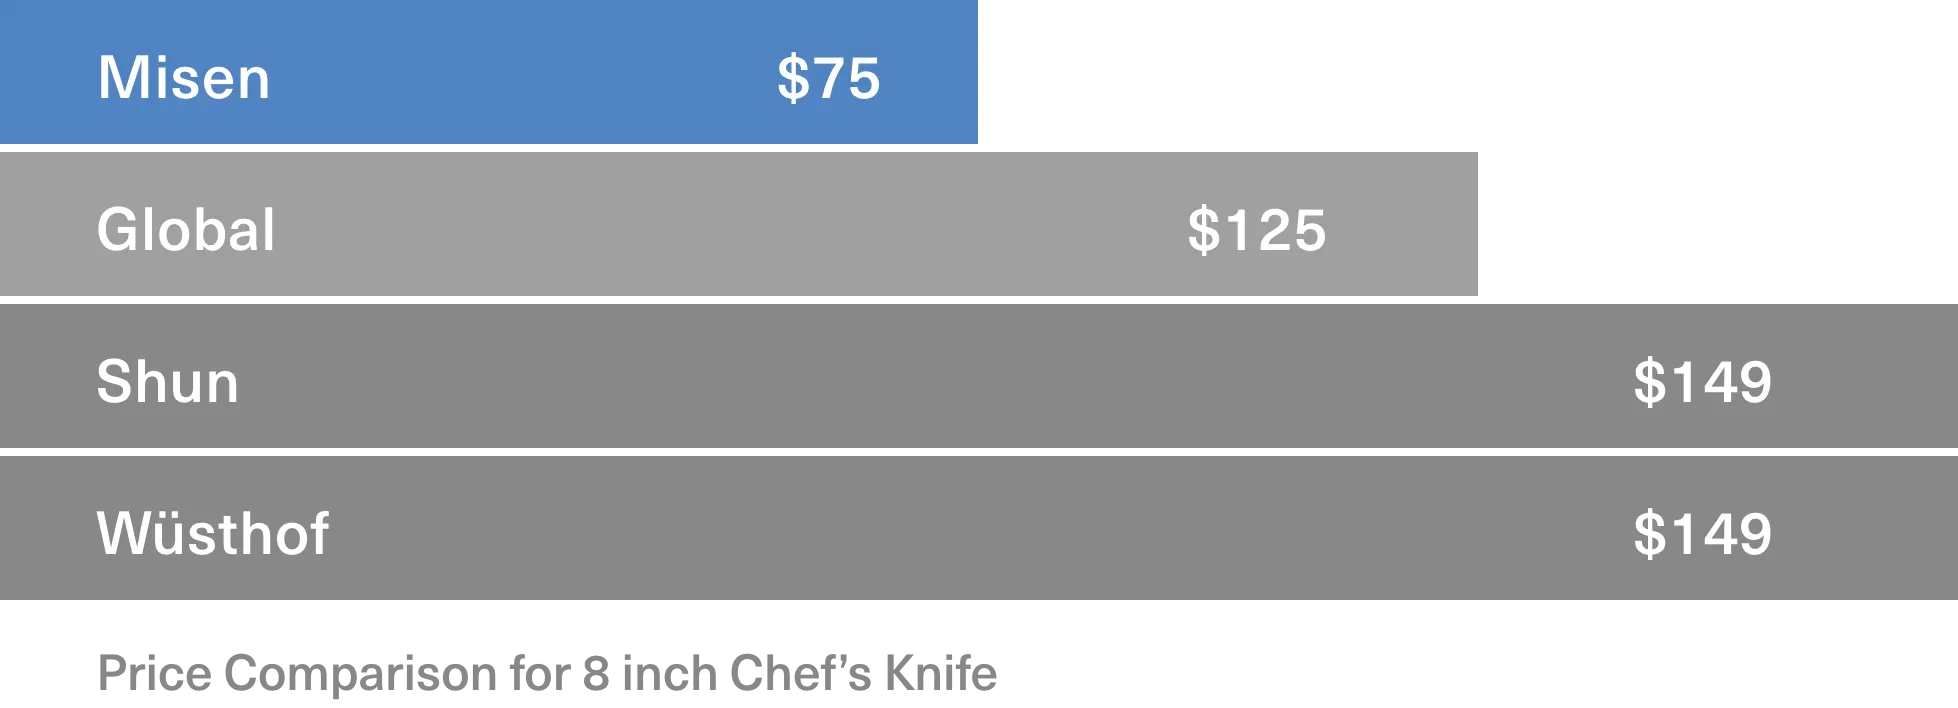 Bar graph comparing prices of premium chef's knives to Misen. From the top: Misen $75, Global $125,  Shun $149, Wusthof $149